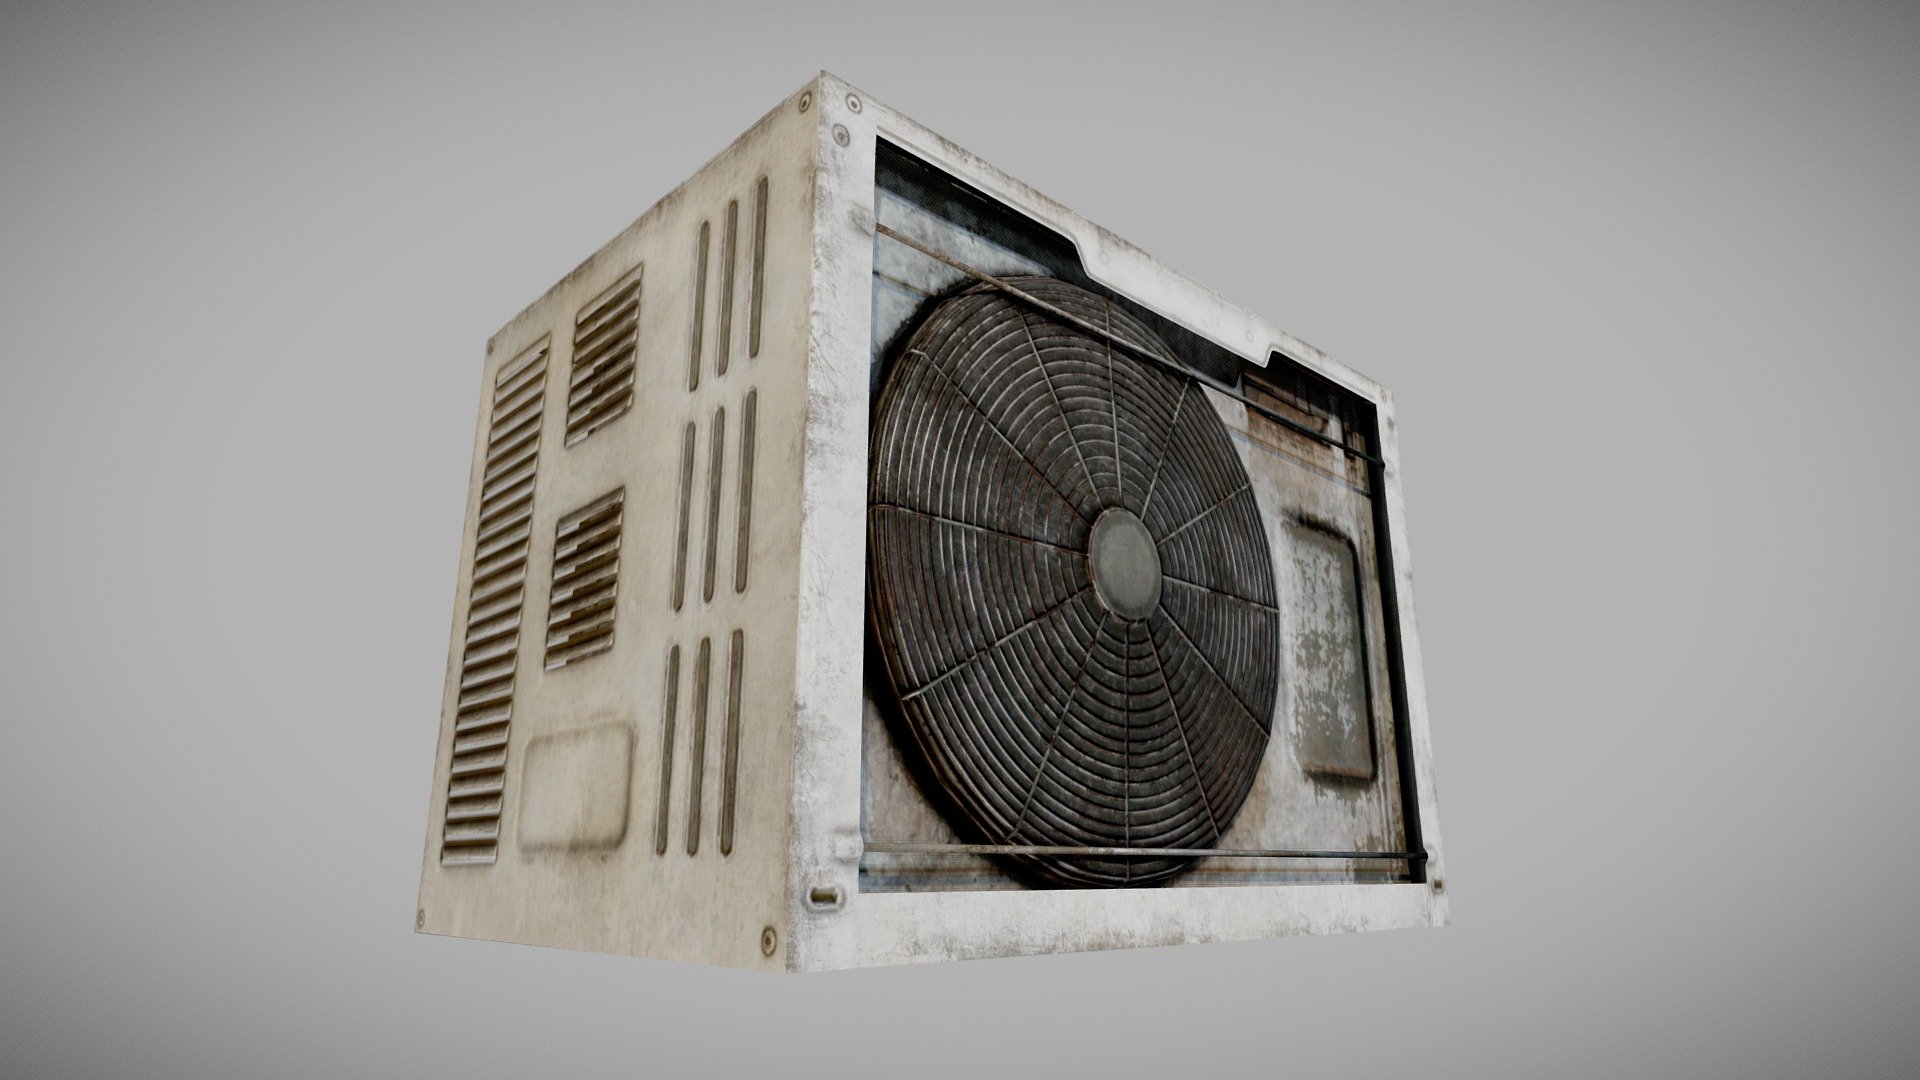 Rusty Air Conditioner 02 PBR

Very Detailed Very Low Poly Air Conditioner Unit for wall mounting, High-Quality PBR Textures.

Fits perfect for any PBR game as Environment Decoration etc.

Created with 3DSMAX, Zbrush and Substance Painter.

Standard Textures
Base Color, Metallic, Roughness, Height, AO, Normal, Maps

Unreal 4 Textures
Base Color, Normal, OcclusionRoughnessMetallic

Unity 5/2017 Textures
Albedo, SpecularSmoothness, Normal, and AO Maps

4096x4096 TGA Textures

Please Note, this PBR Textures Only. 

Low Poly Triangles 

1254 Tris
714 Verts

File Formats :

.Max2019
.Max2018
.Max2017
.Max2016
.FBX
.OBJ
.3DS
.DAE - Rusty Air Conditioner 02 - PBR - Buy Royalty Free 3D model by GamePoly (@triix3d) 3d model